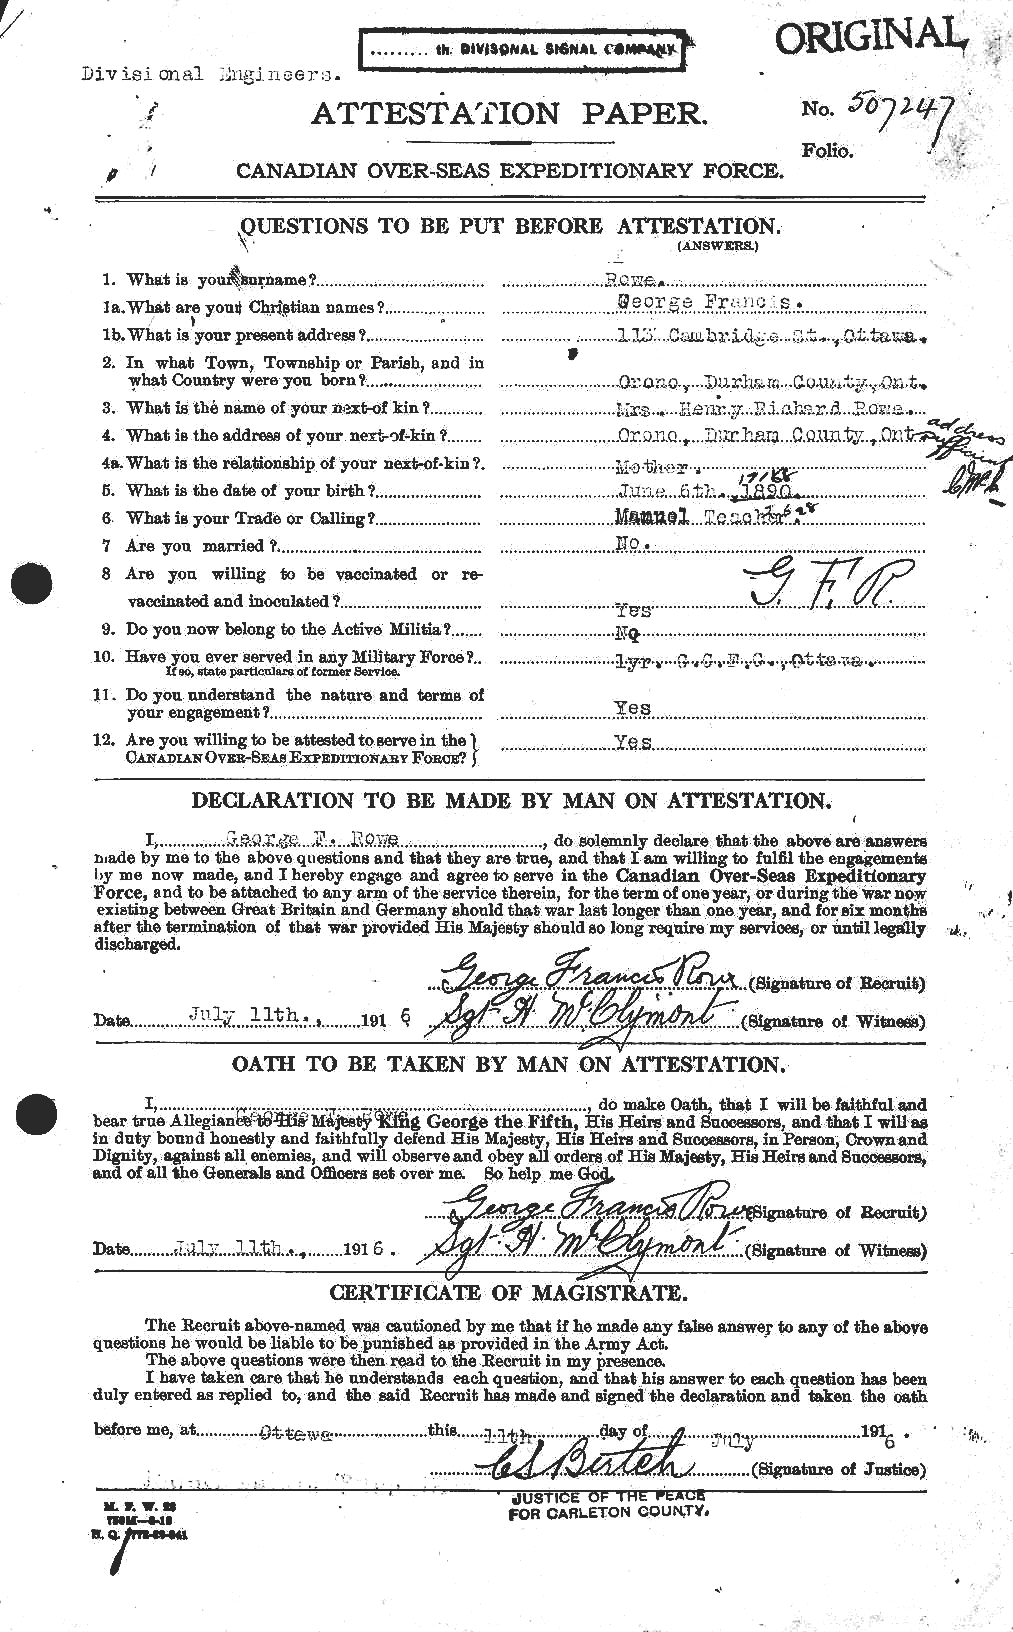 Personnel Records of the First World War - CEF 615879a